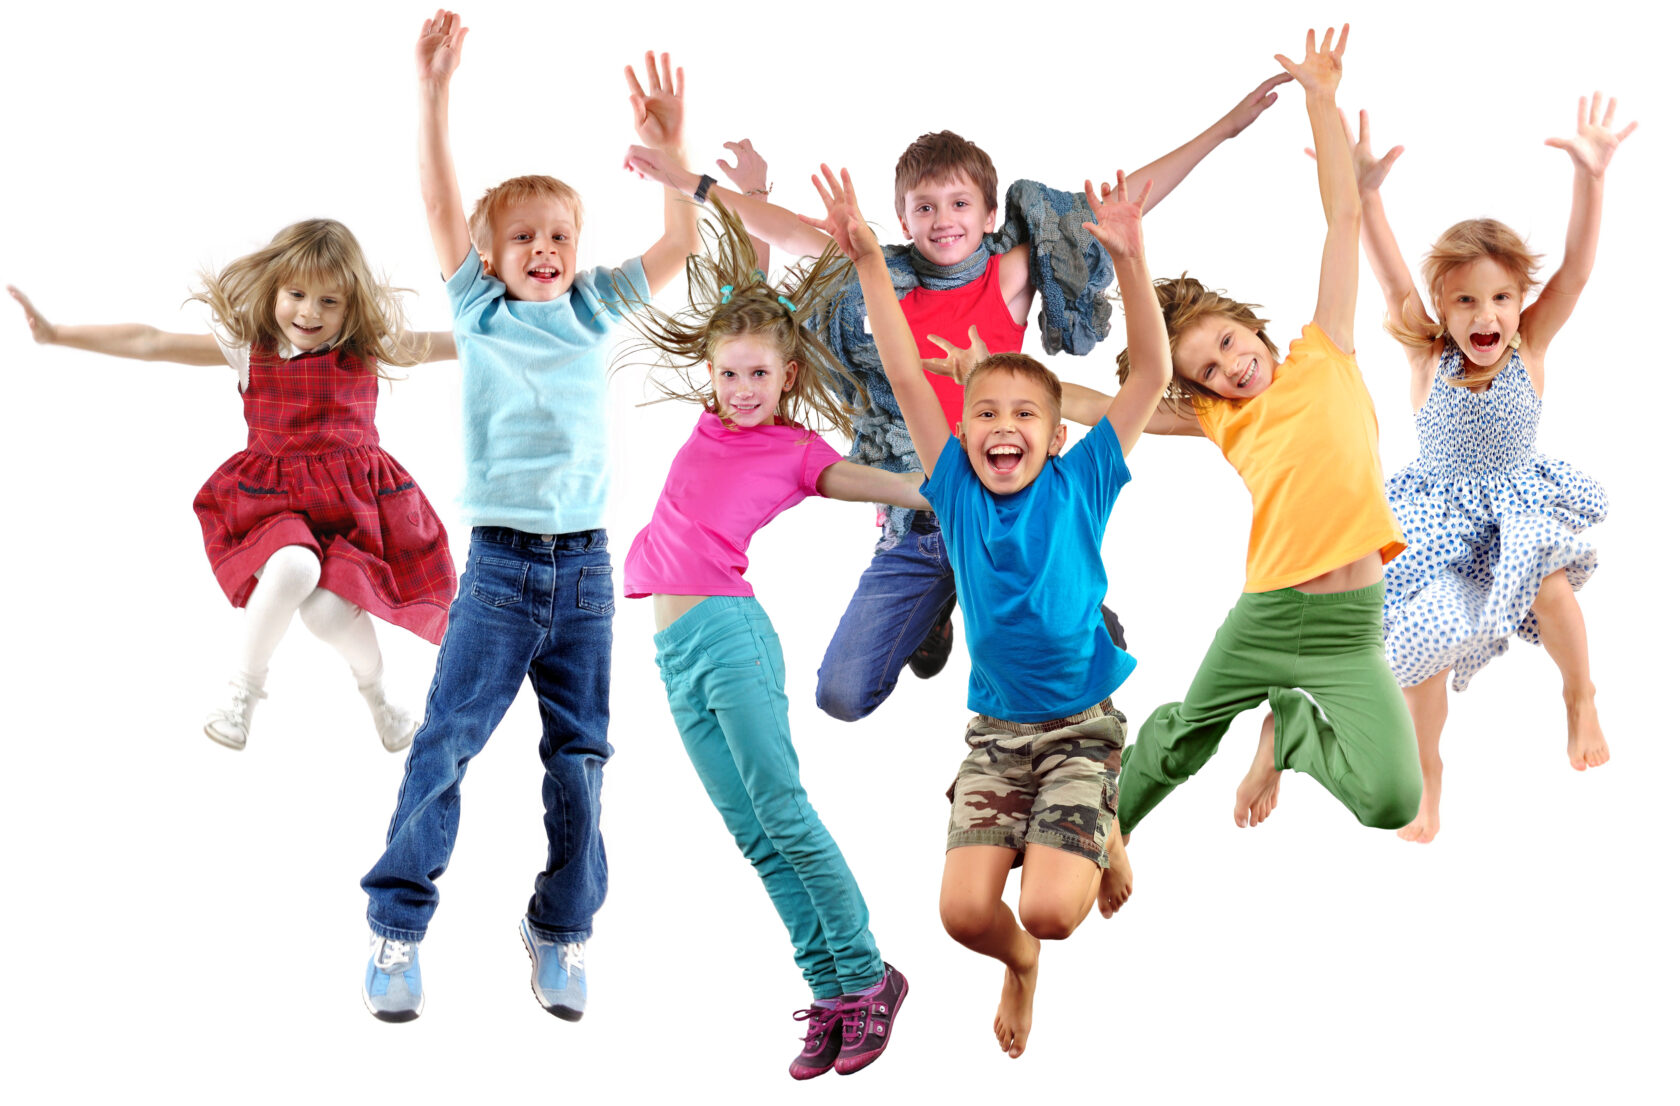 Large,Group,Of,Happy,Cheerful,Sportive,Children,Jumping,,Sporting,And